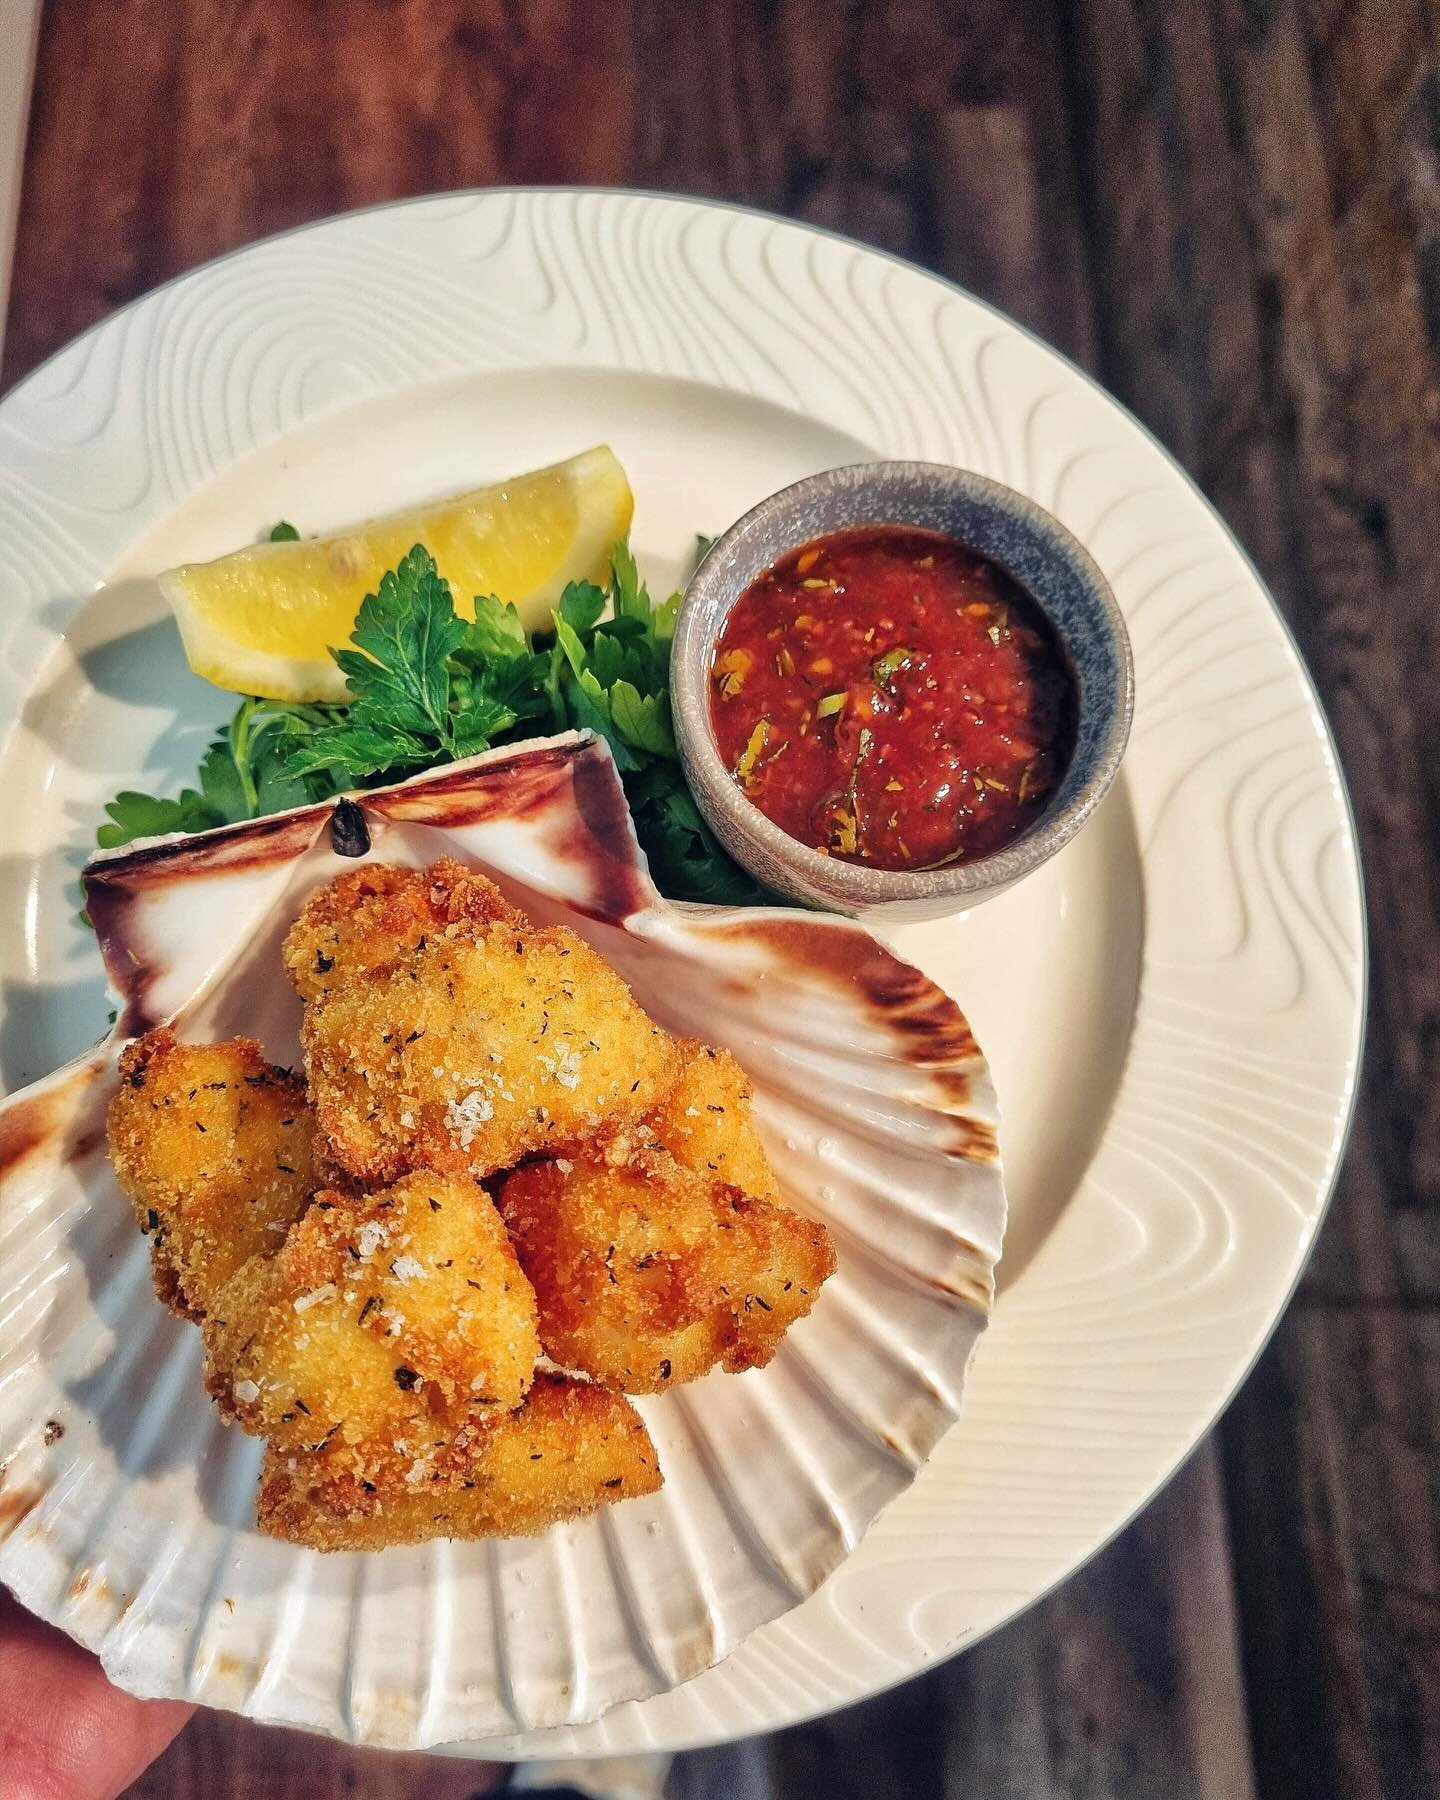 One of the joys of a daily changing menu informed by the freshest catch at the south coast markets, is that you never know exactly what you&rsquo;re gonna get!

Like these monkfish scampi in a lemon &amp; thyme crumb with sweet chilli jam that snuck 